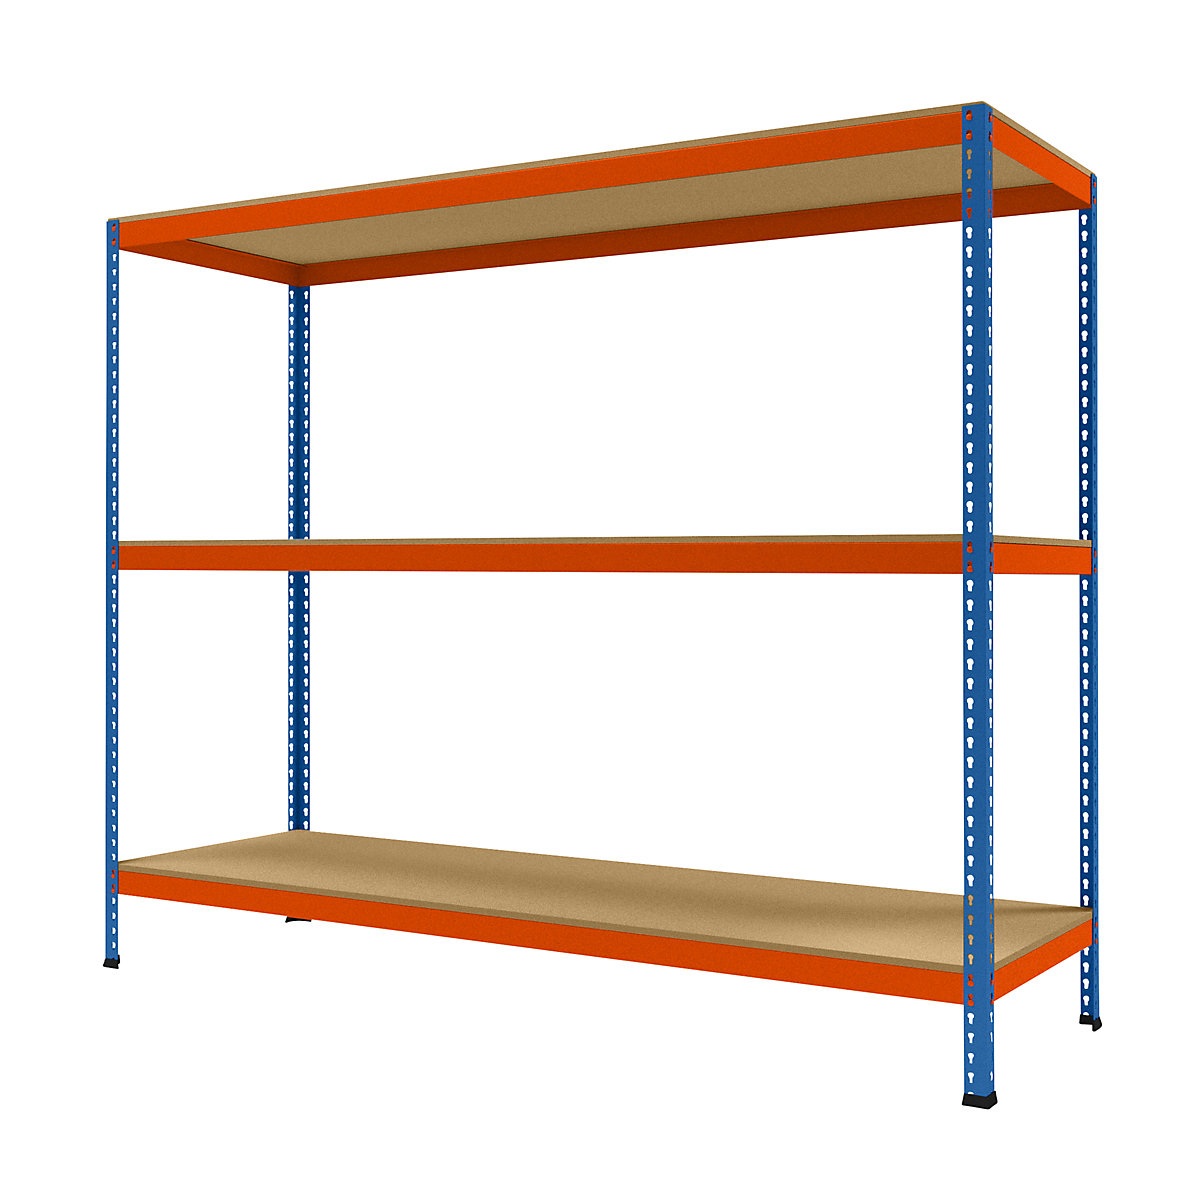 Wide span heavy duty shelving, height 1981 mm, overall depth 773 mm, width 2450 mm